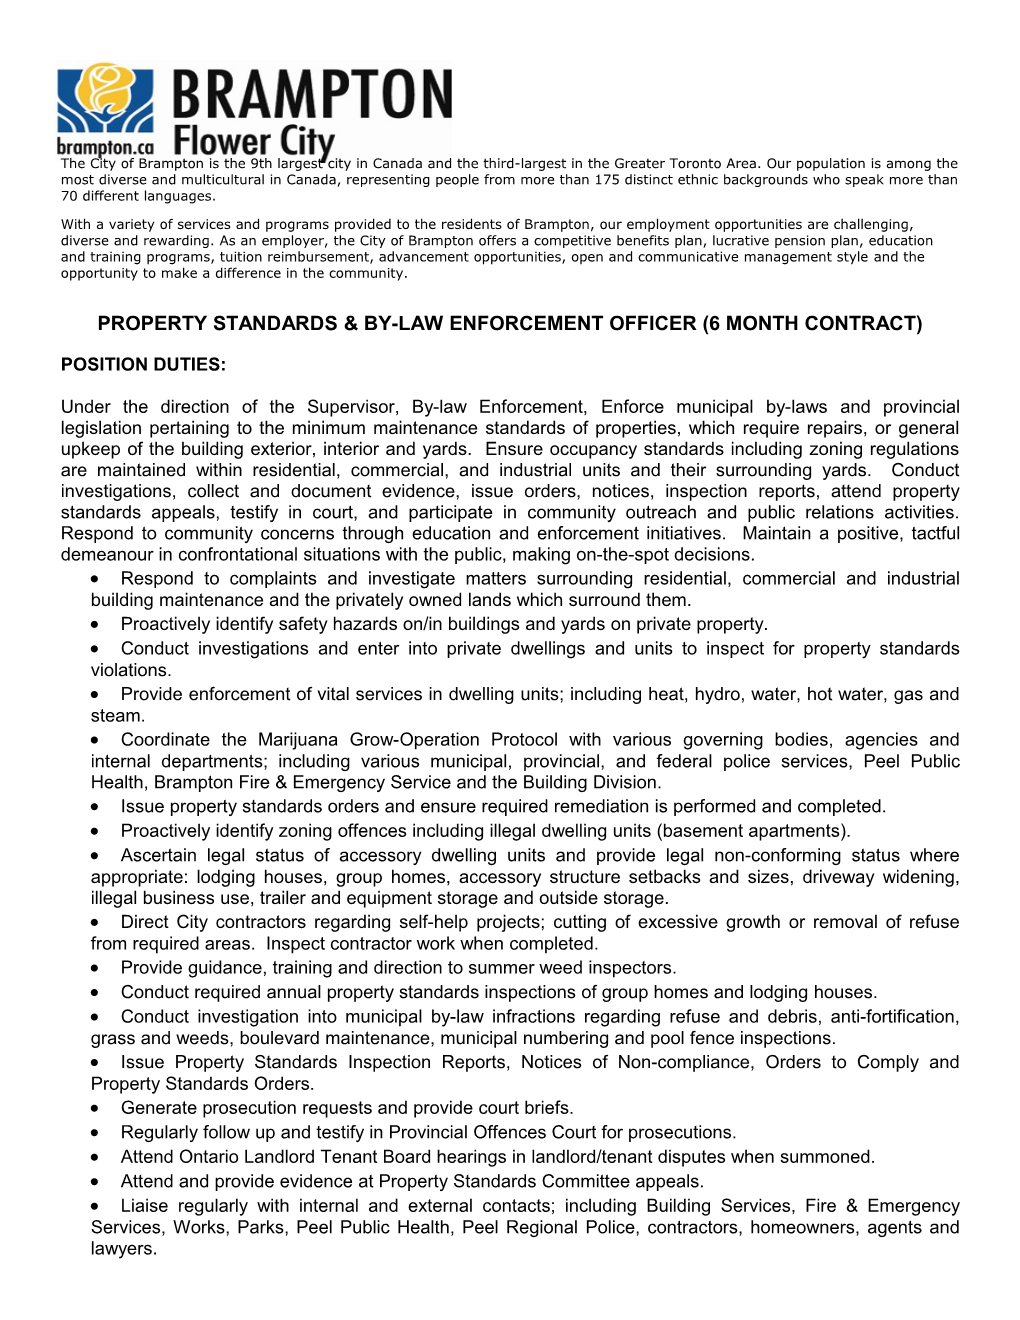 Property Standards & By-Law Enforcement Officer(6 Month Contract)